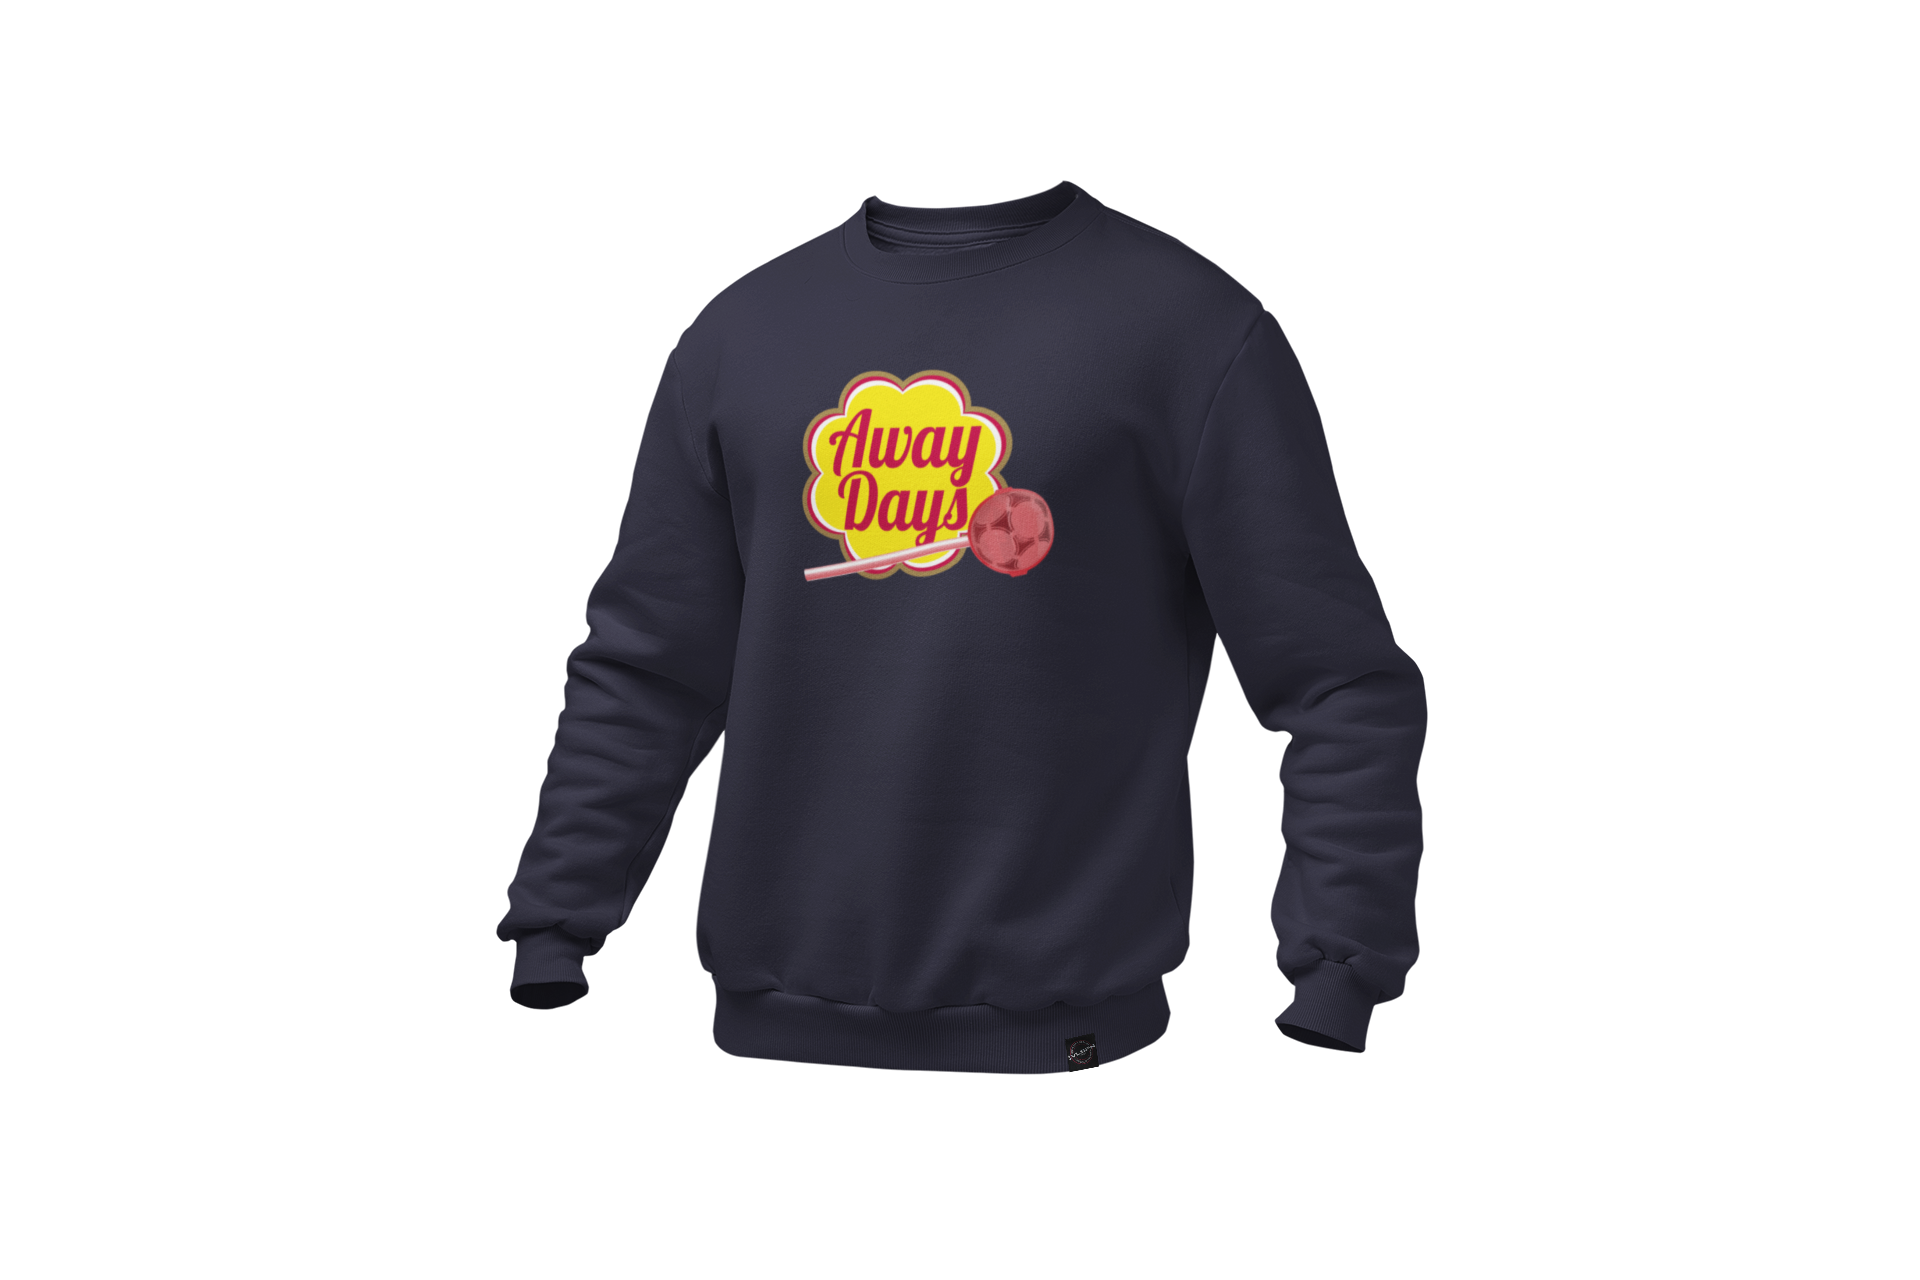 mockup-of-a-ghosted-crewneck-sweatshirt-over-a-solid-background-26960 - 2020-11-06T163746.498.png